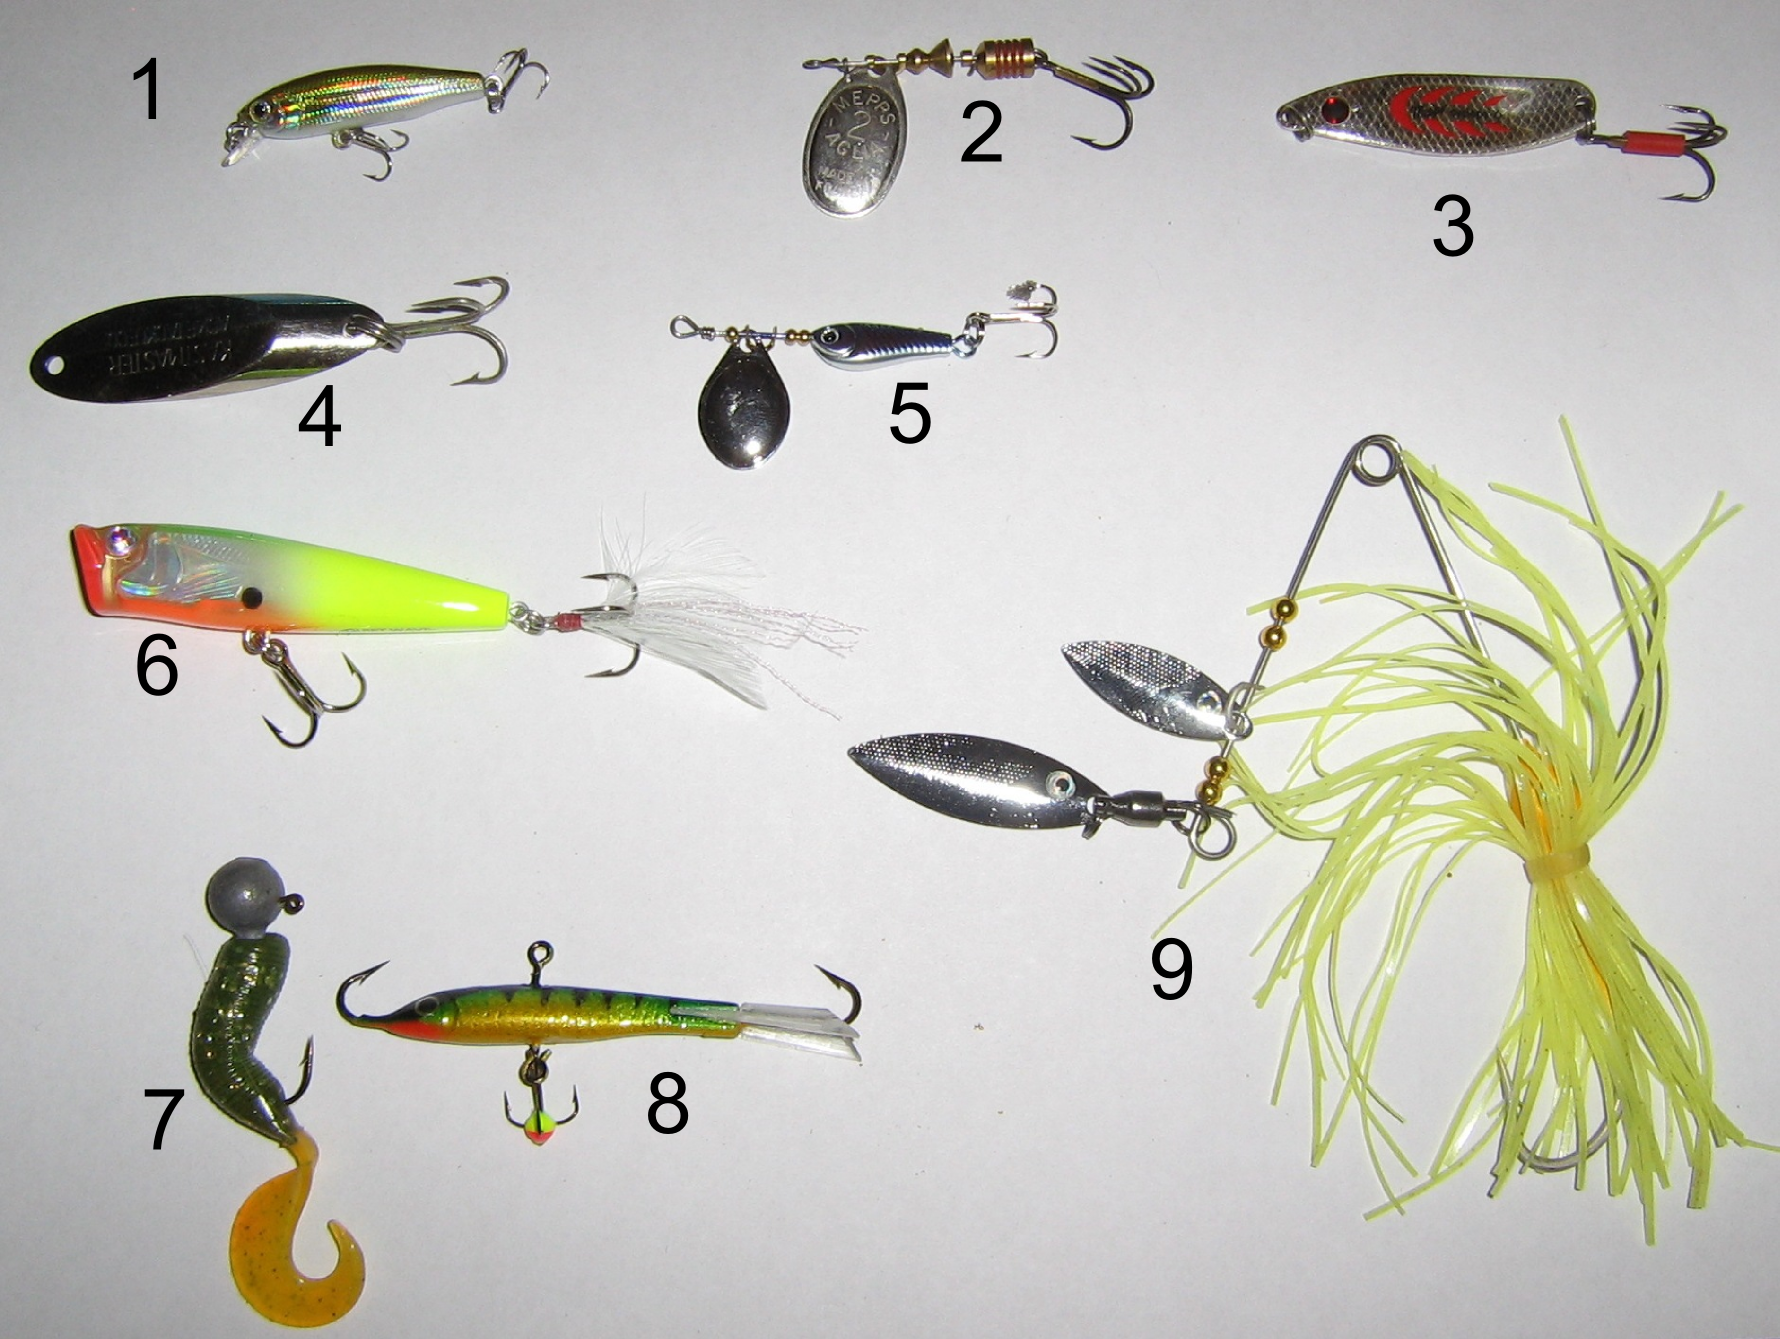 File:Perch lures.png - Wikipedia